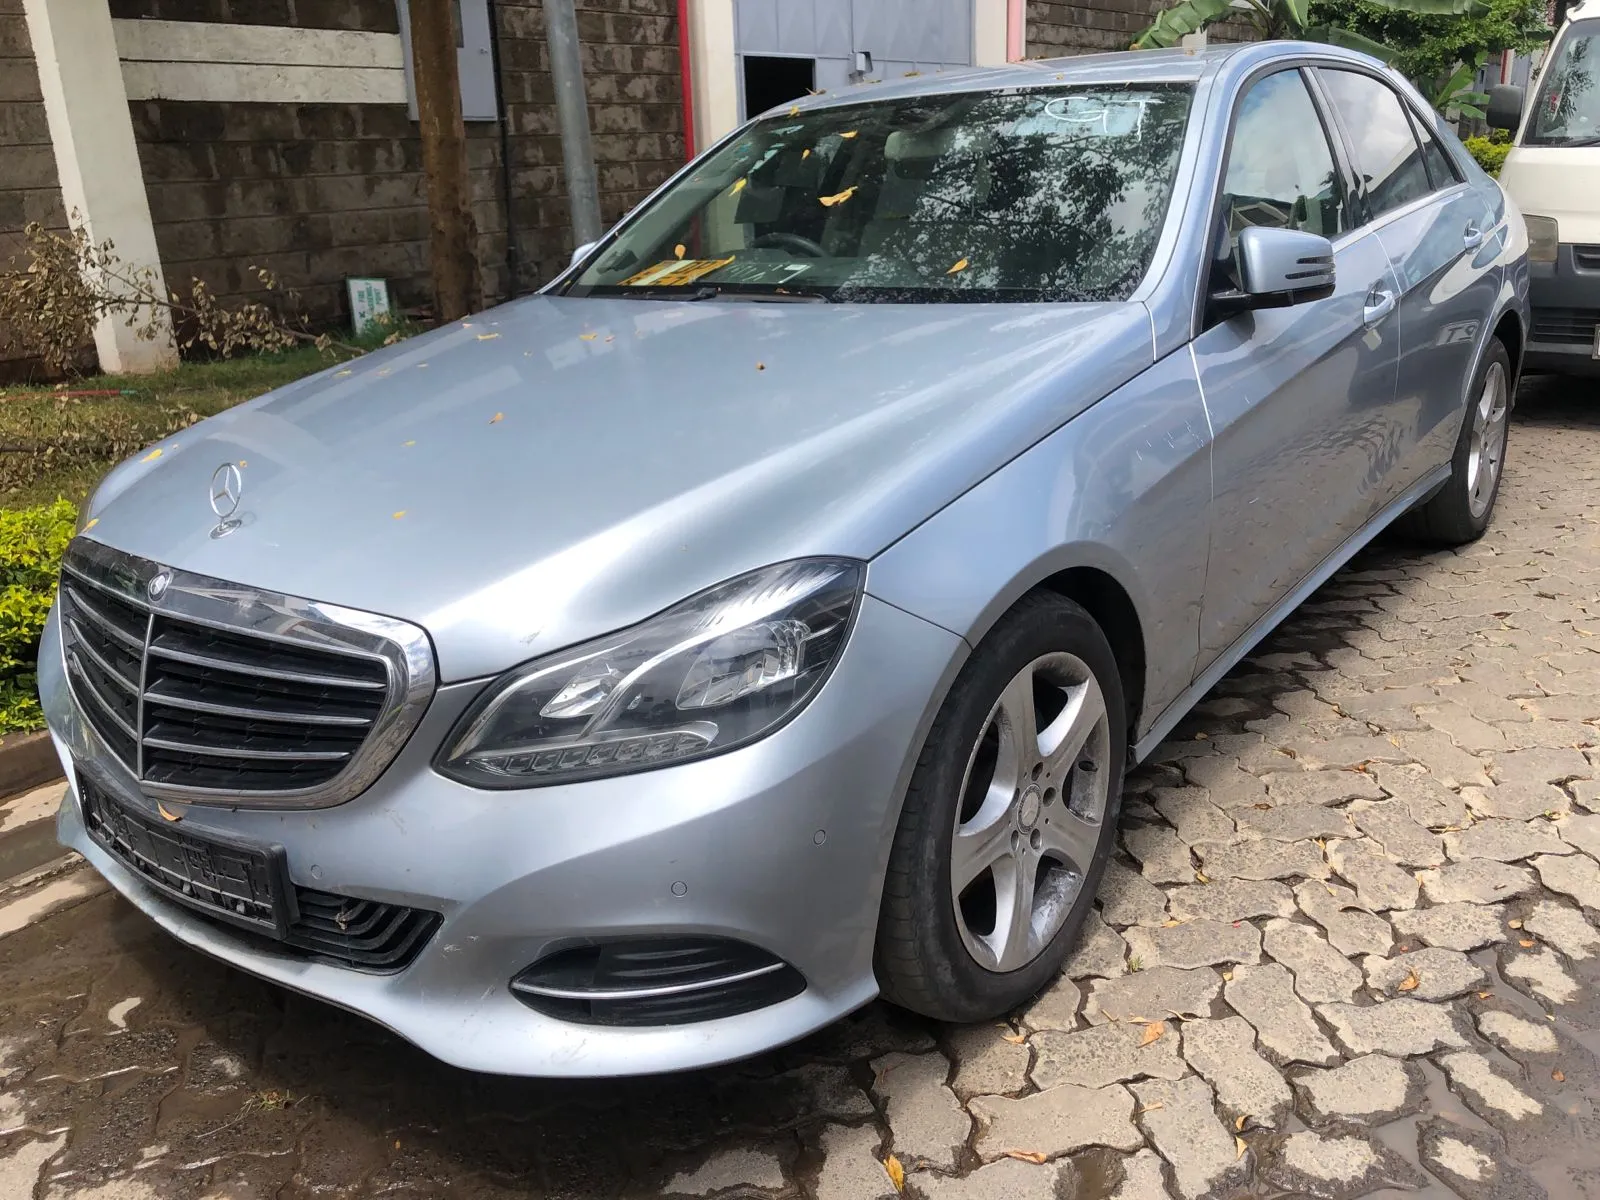 QUICK SALE Mercedes Benz E250 for sale in Kenya Cheapest You Pay 30% DEPOSIT Trade in OK EXCLUSIVE hire purchase installments 🔥 ON SALE